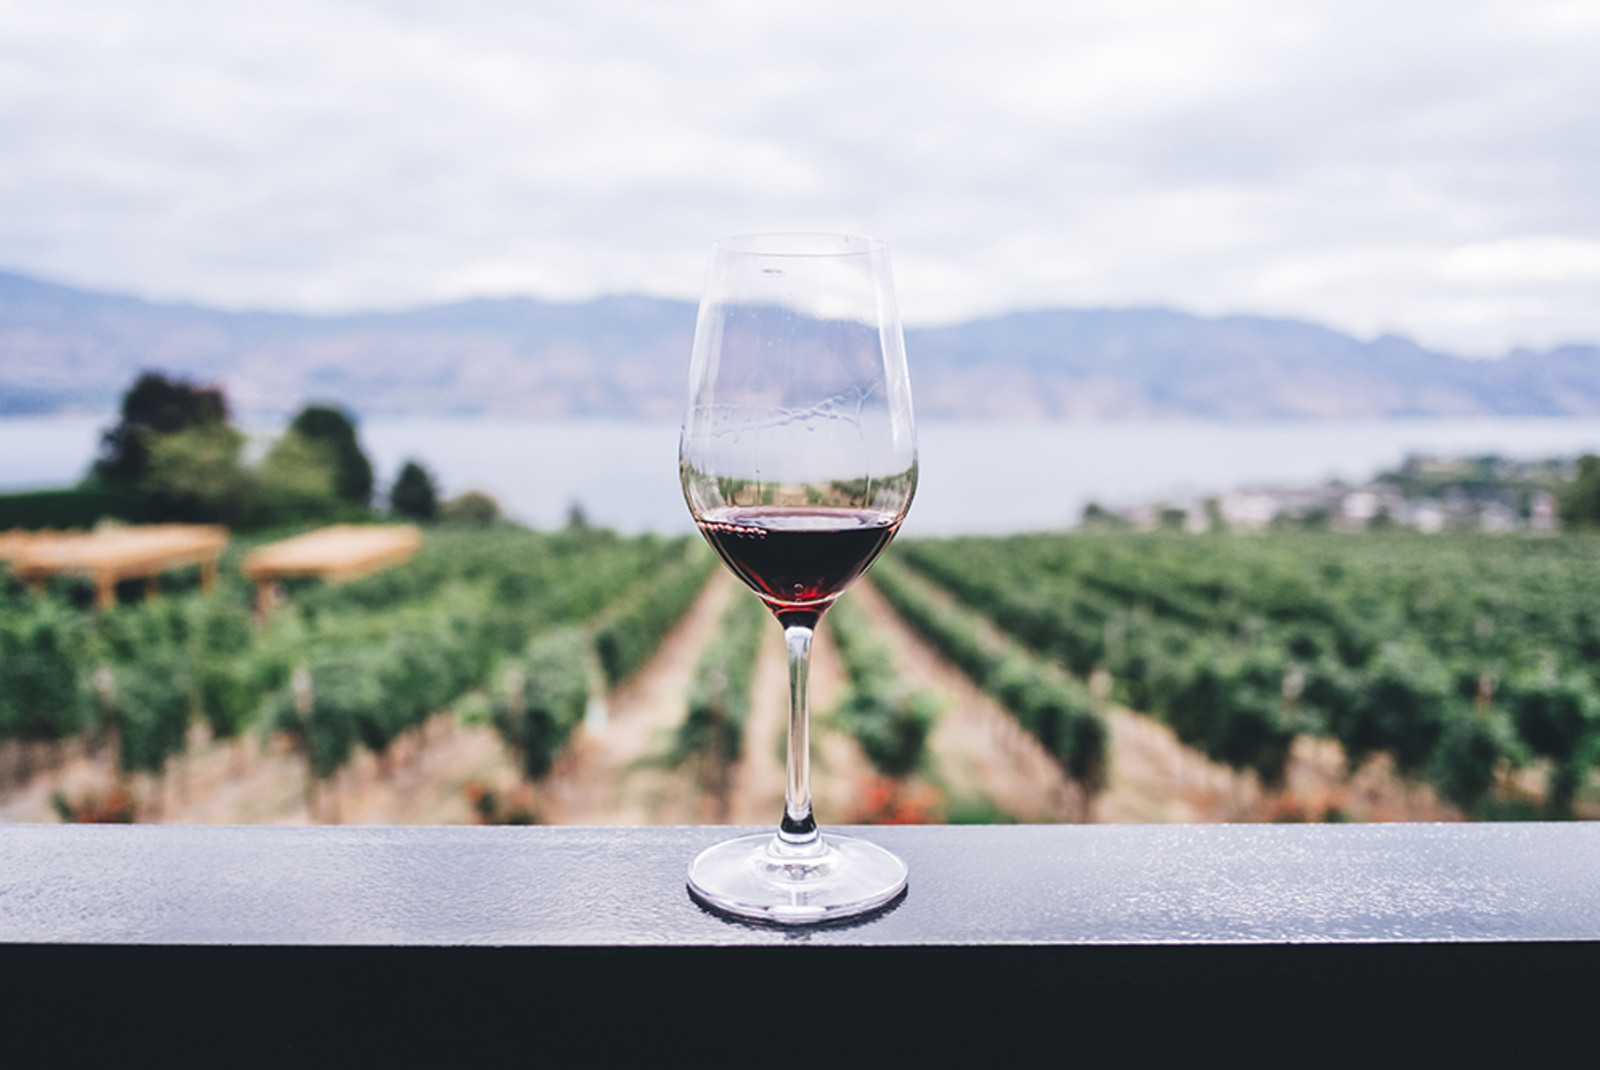 clear wine glass with red wine on black wooden balcony overlooking vineyards of green grape vines and blue mountains